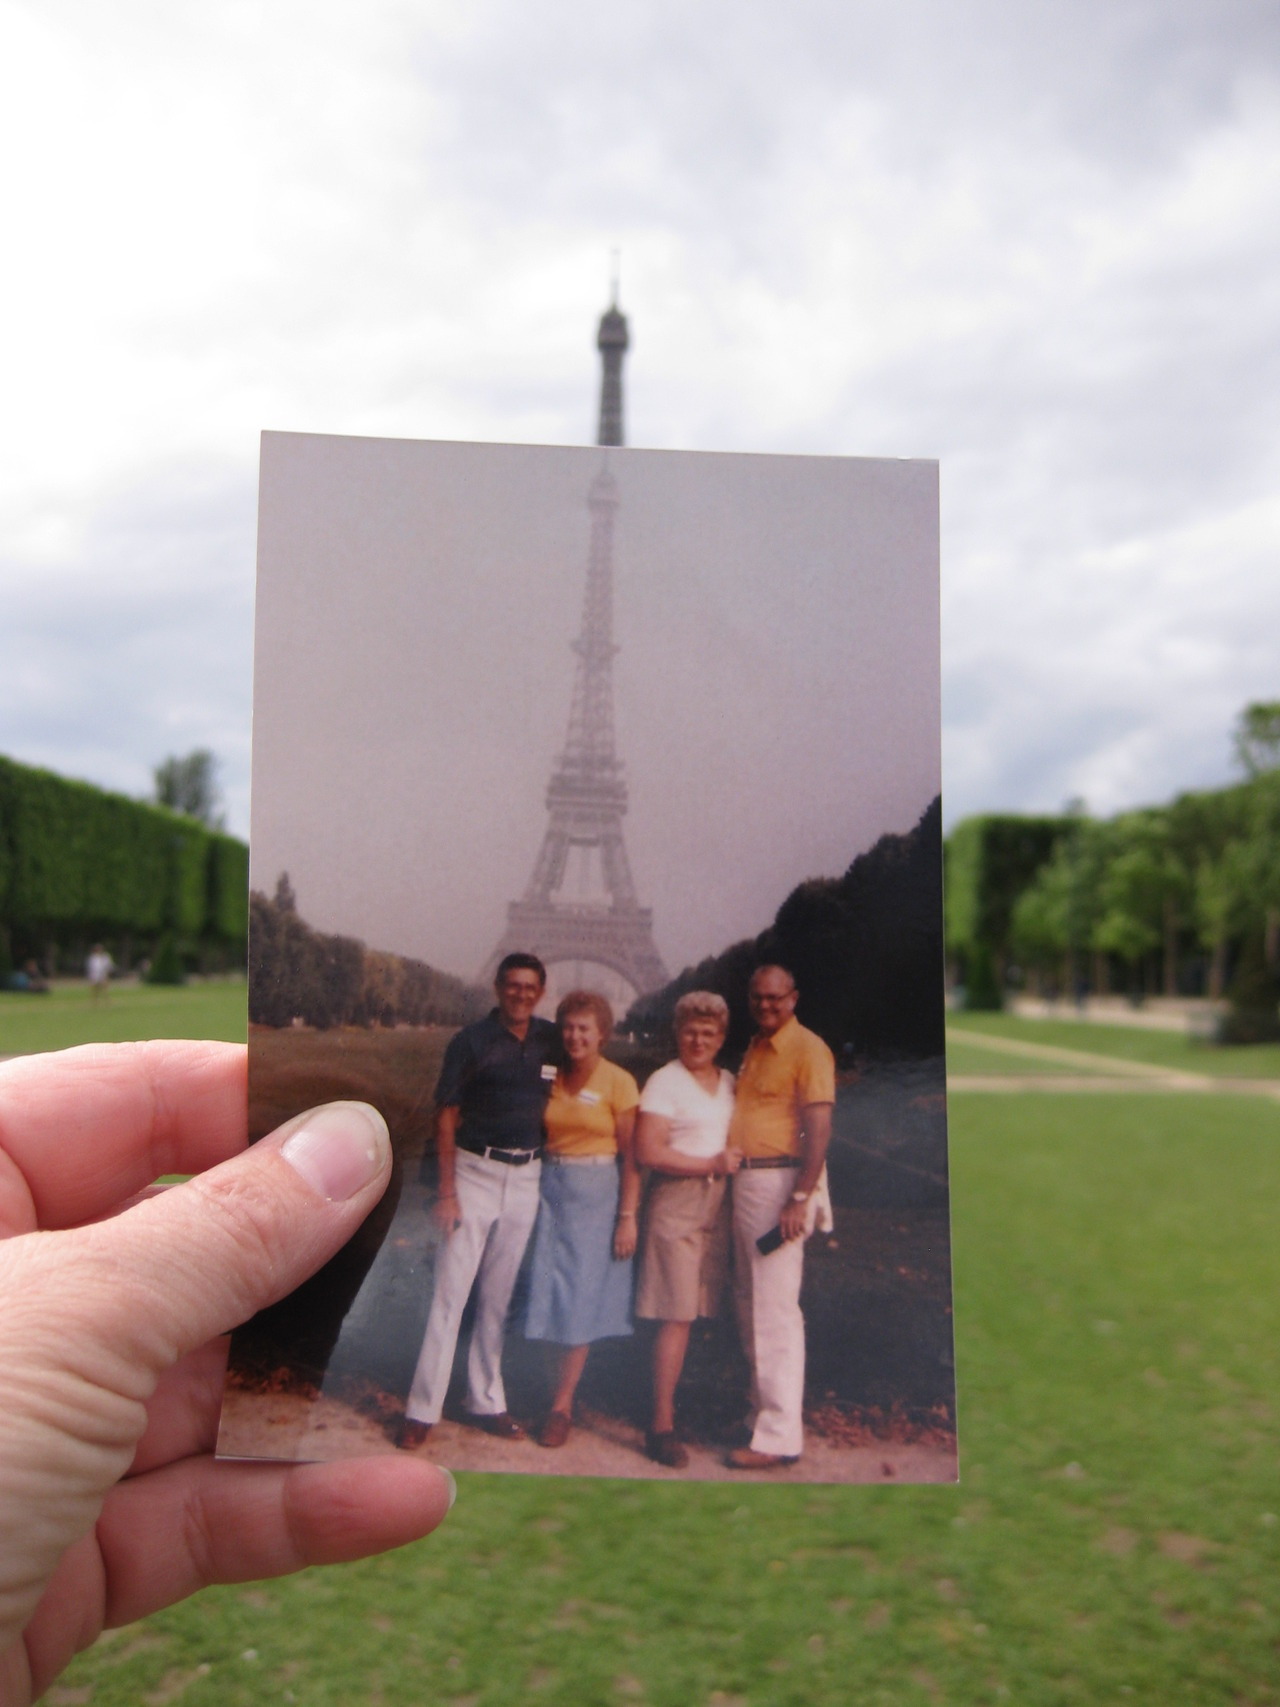 Dear Photograph,
30 years ago my parents took the trip of a lifetime with their two best friends. As I look at their faces in this picture, I can imagine the wonderful times that they shared together. This summer I had the chance to stand in that...